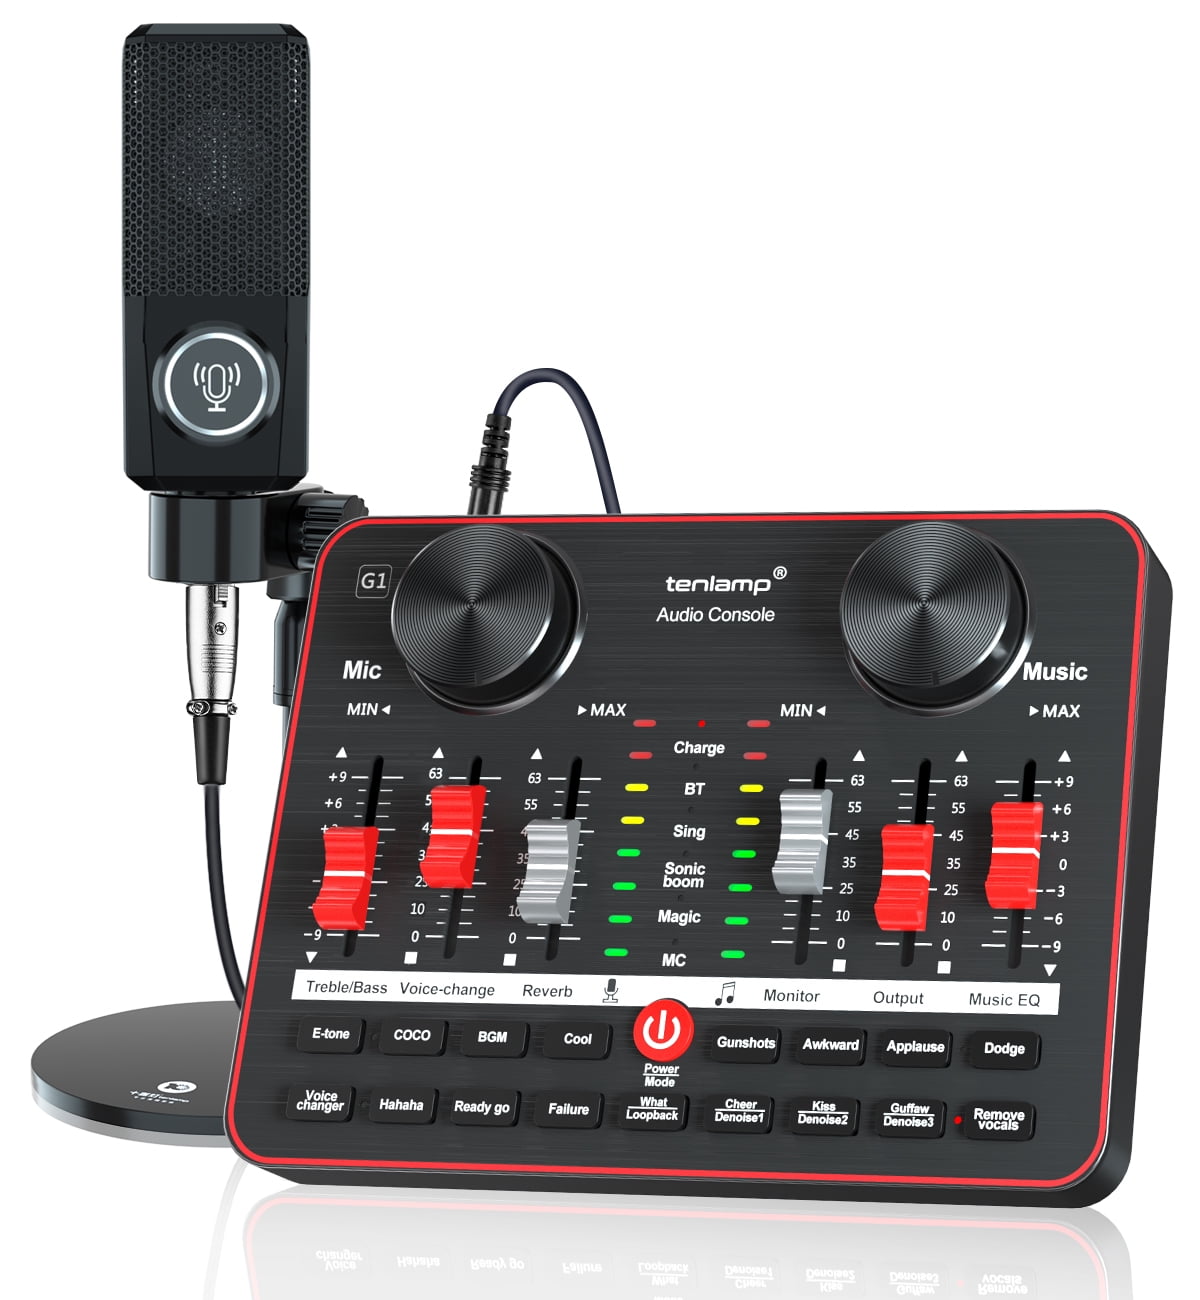 Grønne bønner telegram anspore Live Sound Card Set, G1 Audio Mixer Kit with Streaming Microphone,Audio  Interface Voice Changer, USB DIGITAL Podcast Equipment Bundle for  Streaming/Singing/Gaming on Phone or PC - Walmart.com